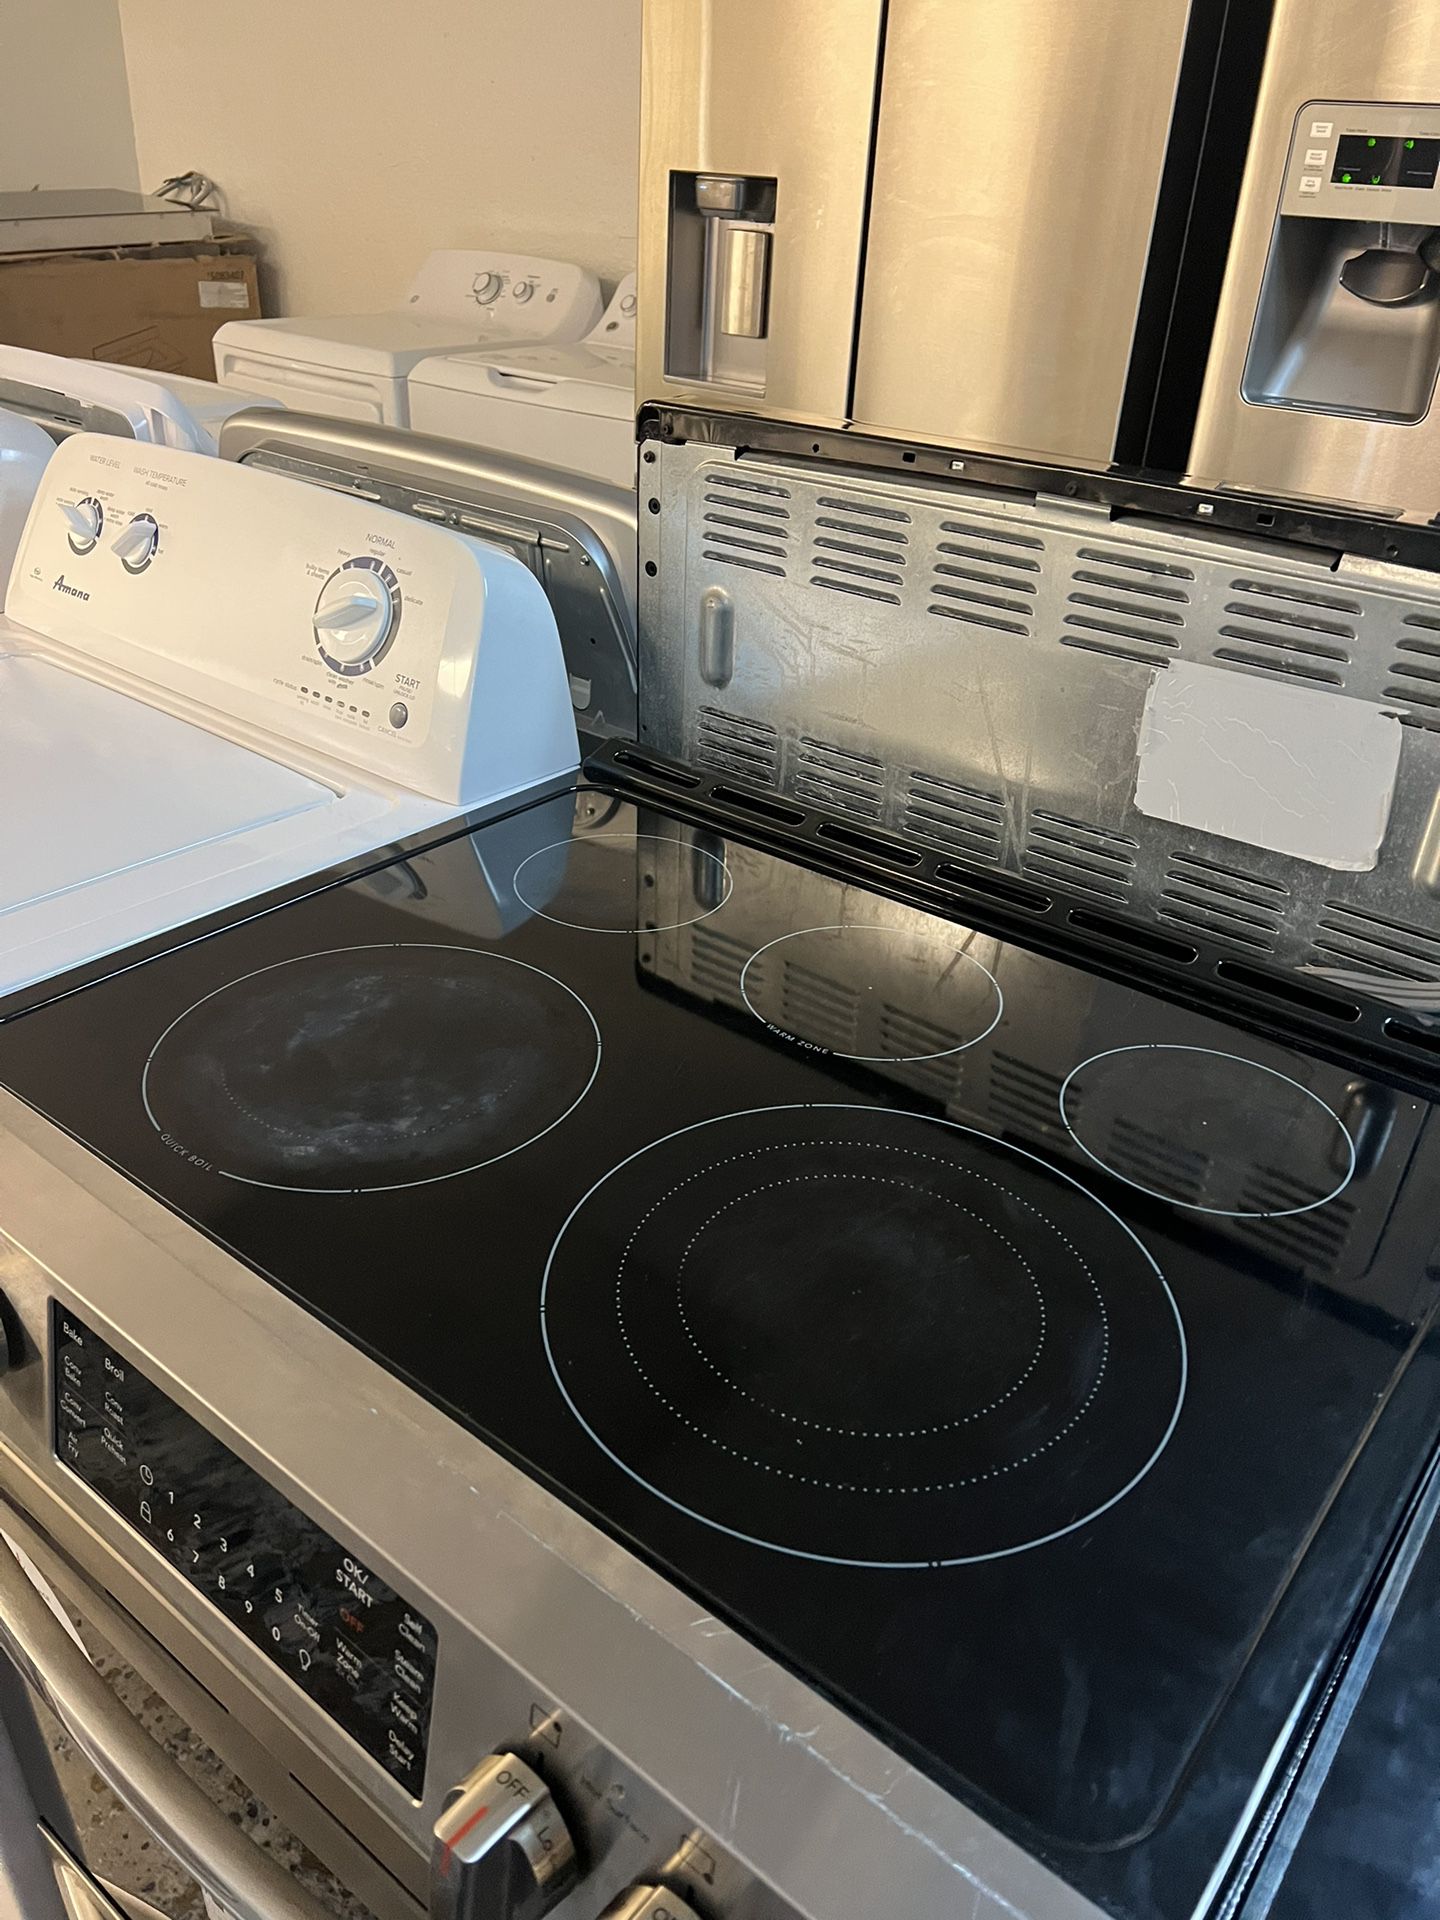 DeLonghi BQ100 Indoor Grill and Smokeless Broiler for Sale in Hialeah  Gardens, FL - OfferUp